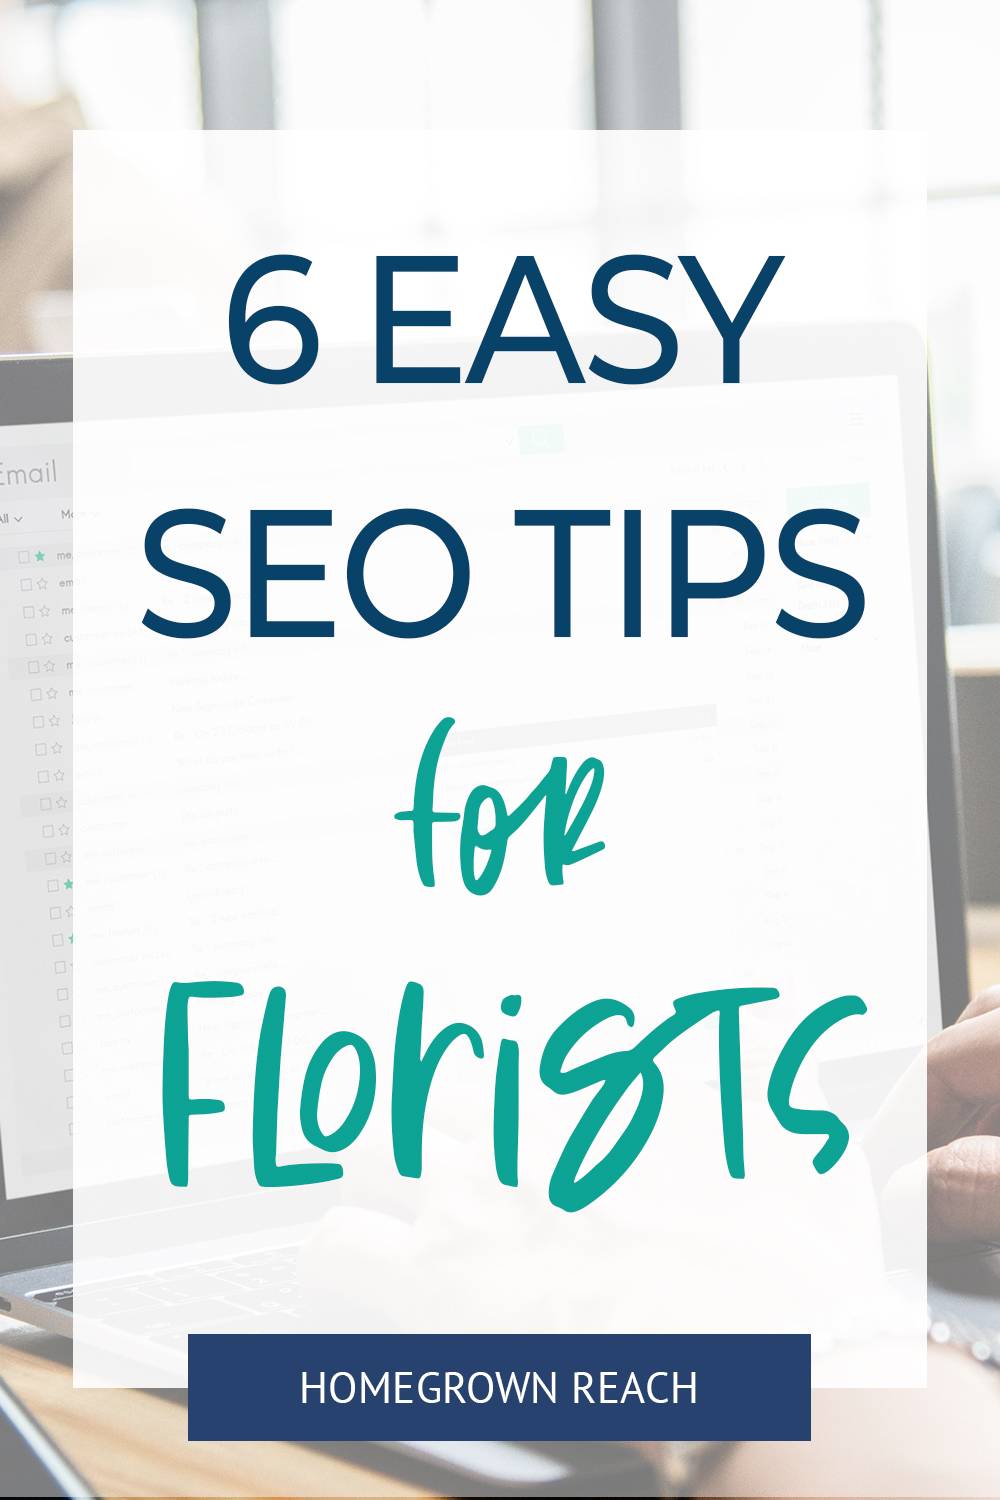 SEO for Florists: 6 Easy Tips to Help You Rank Higher on Google